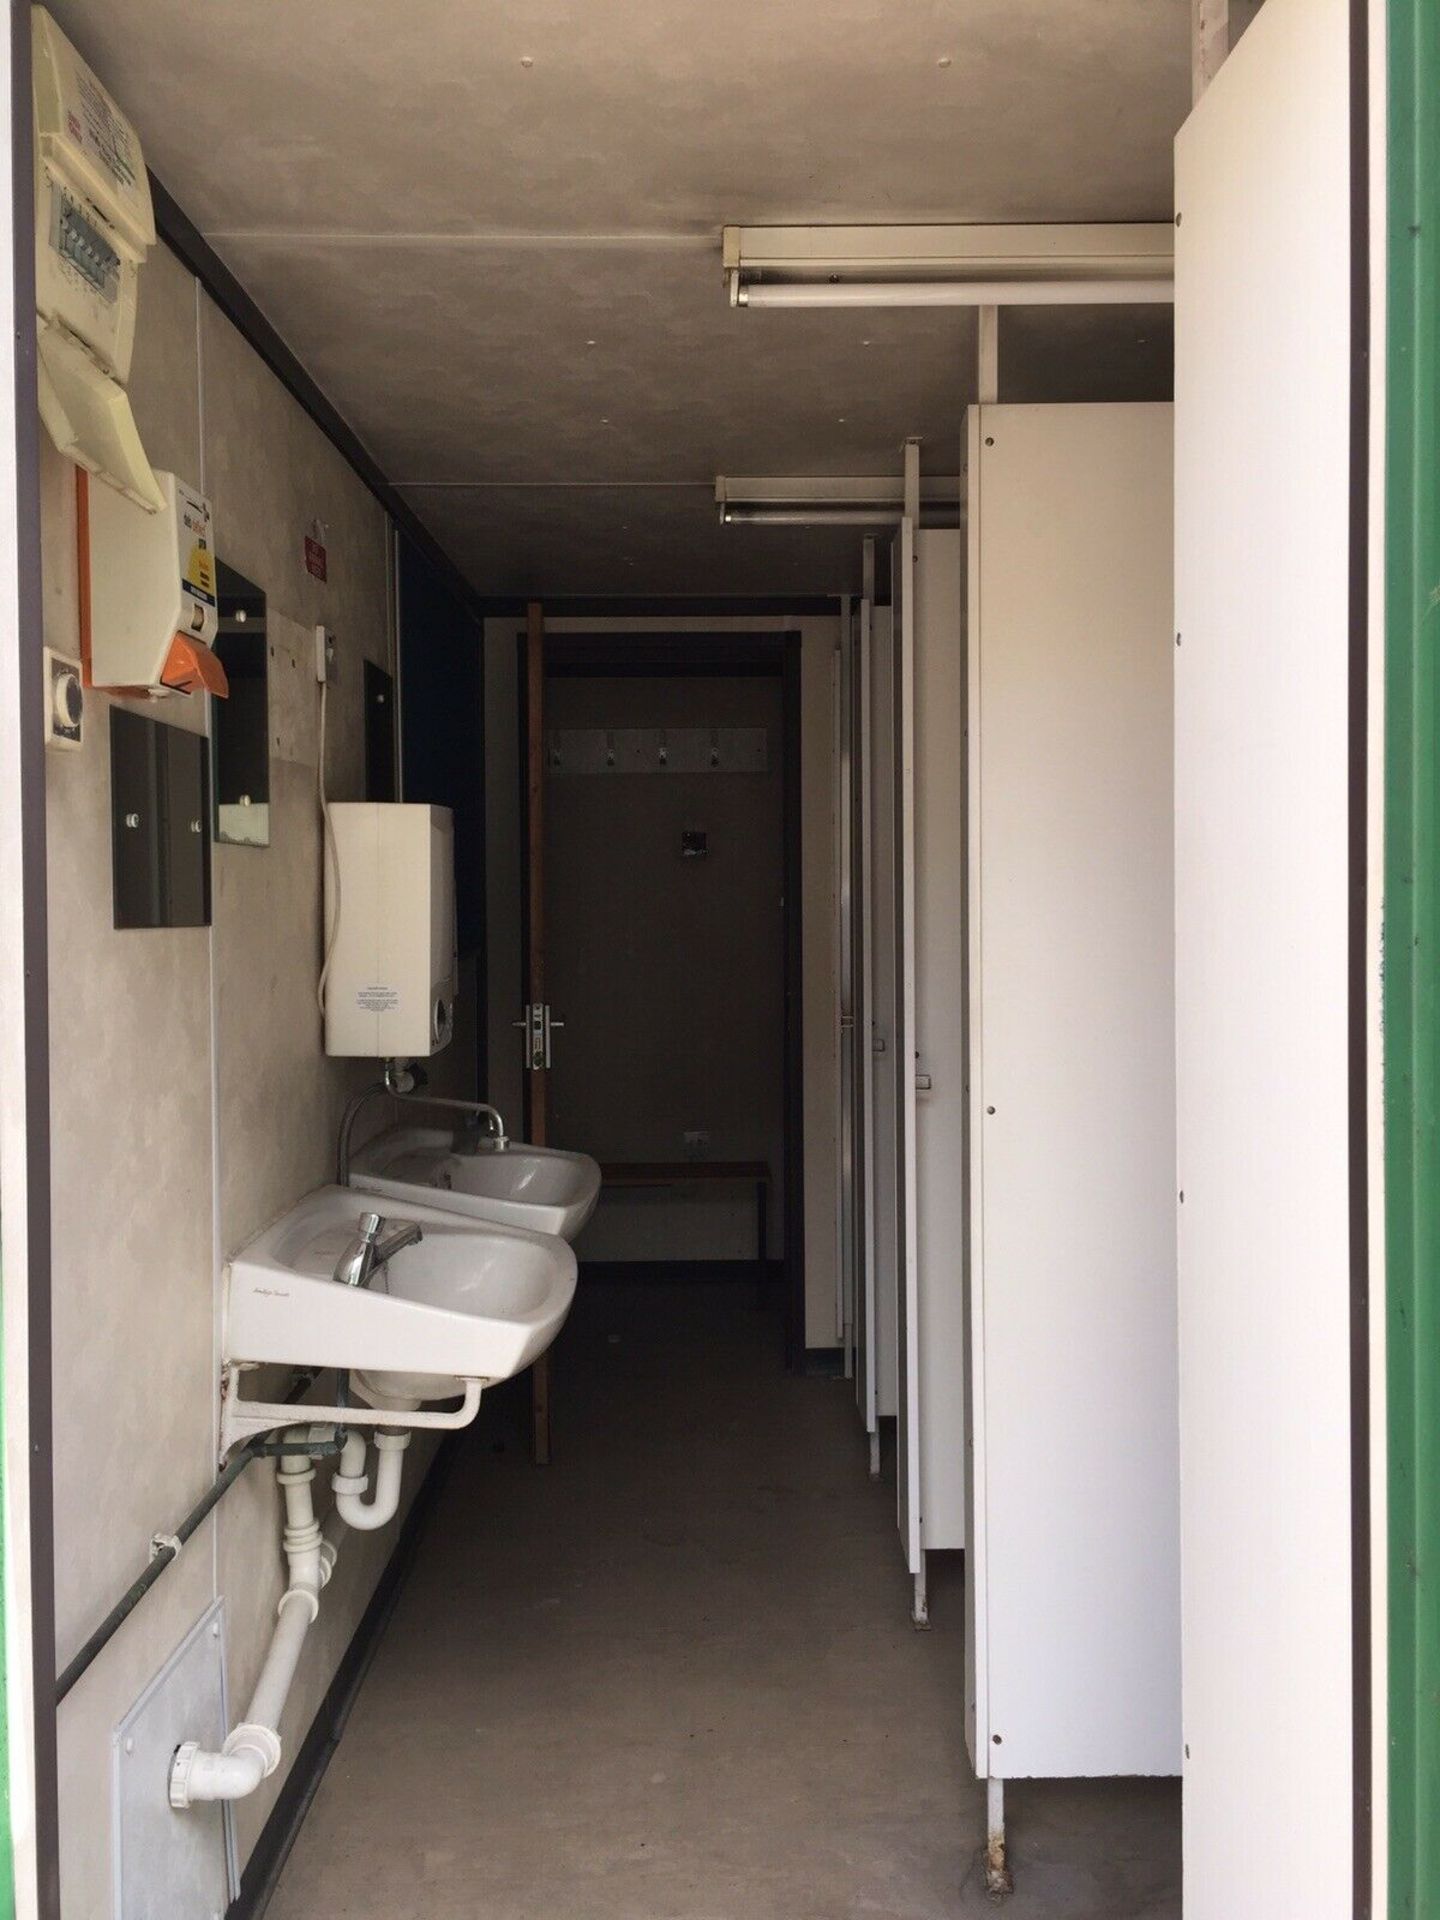 Portable Toilet Block With Shower Steel Welfare Unit - Image 2 of 12